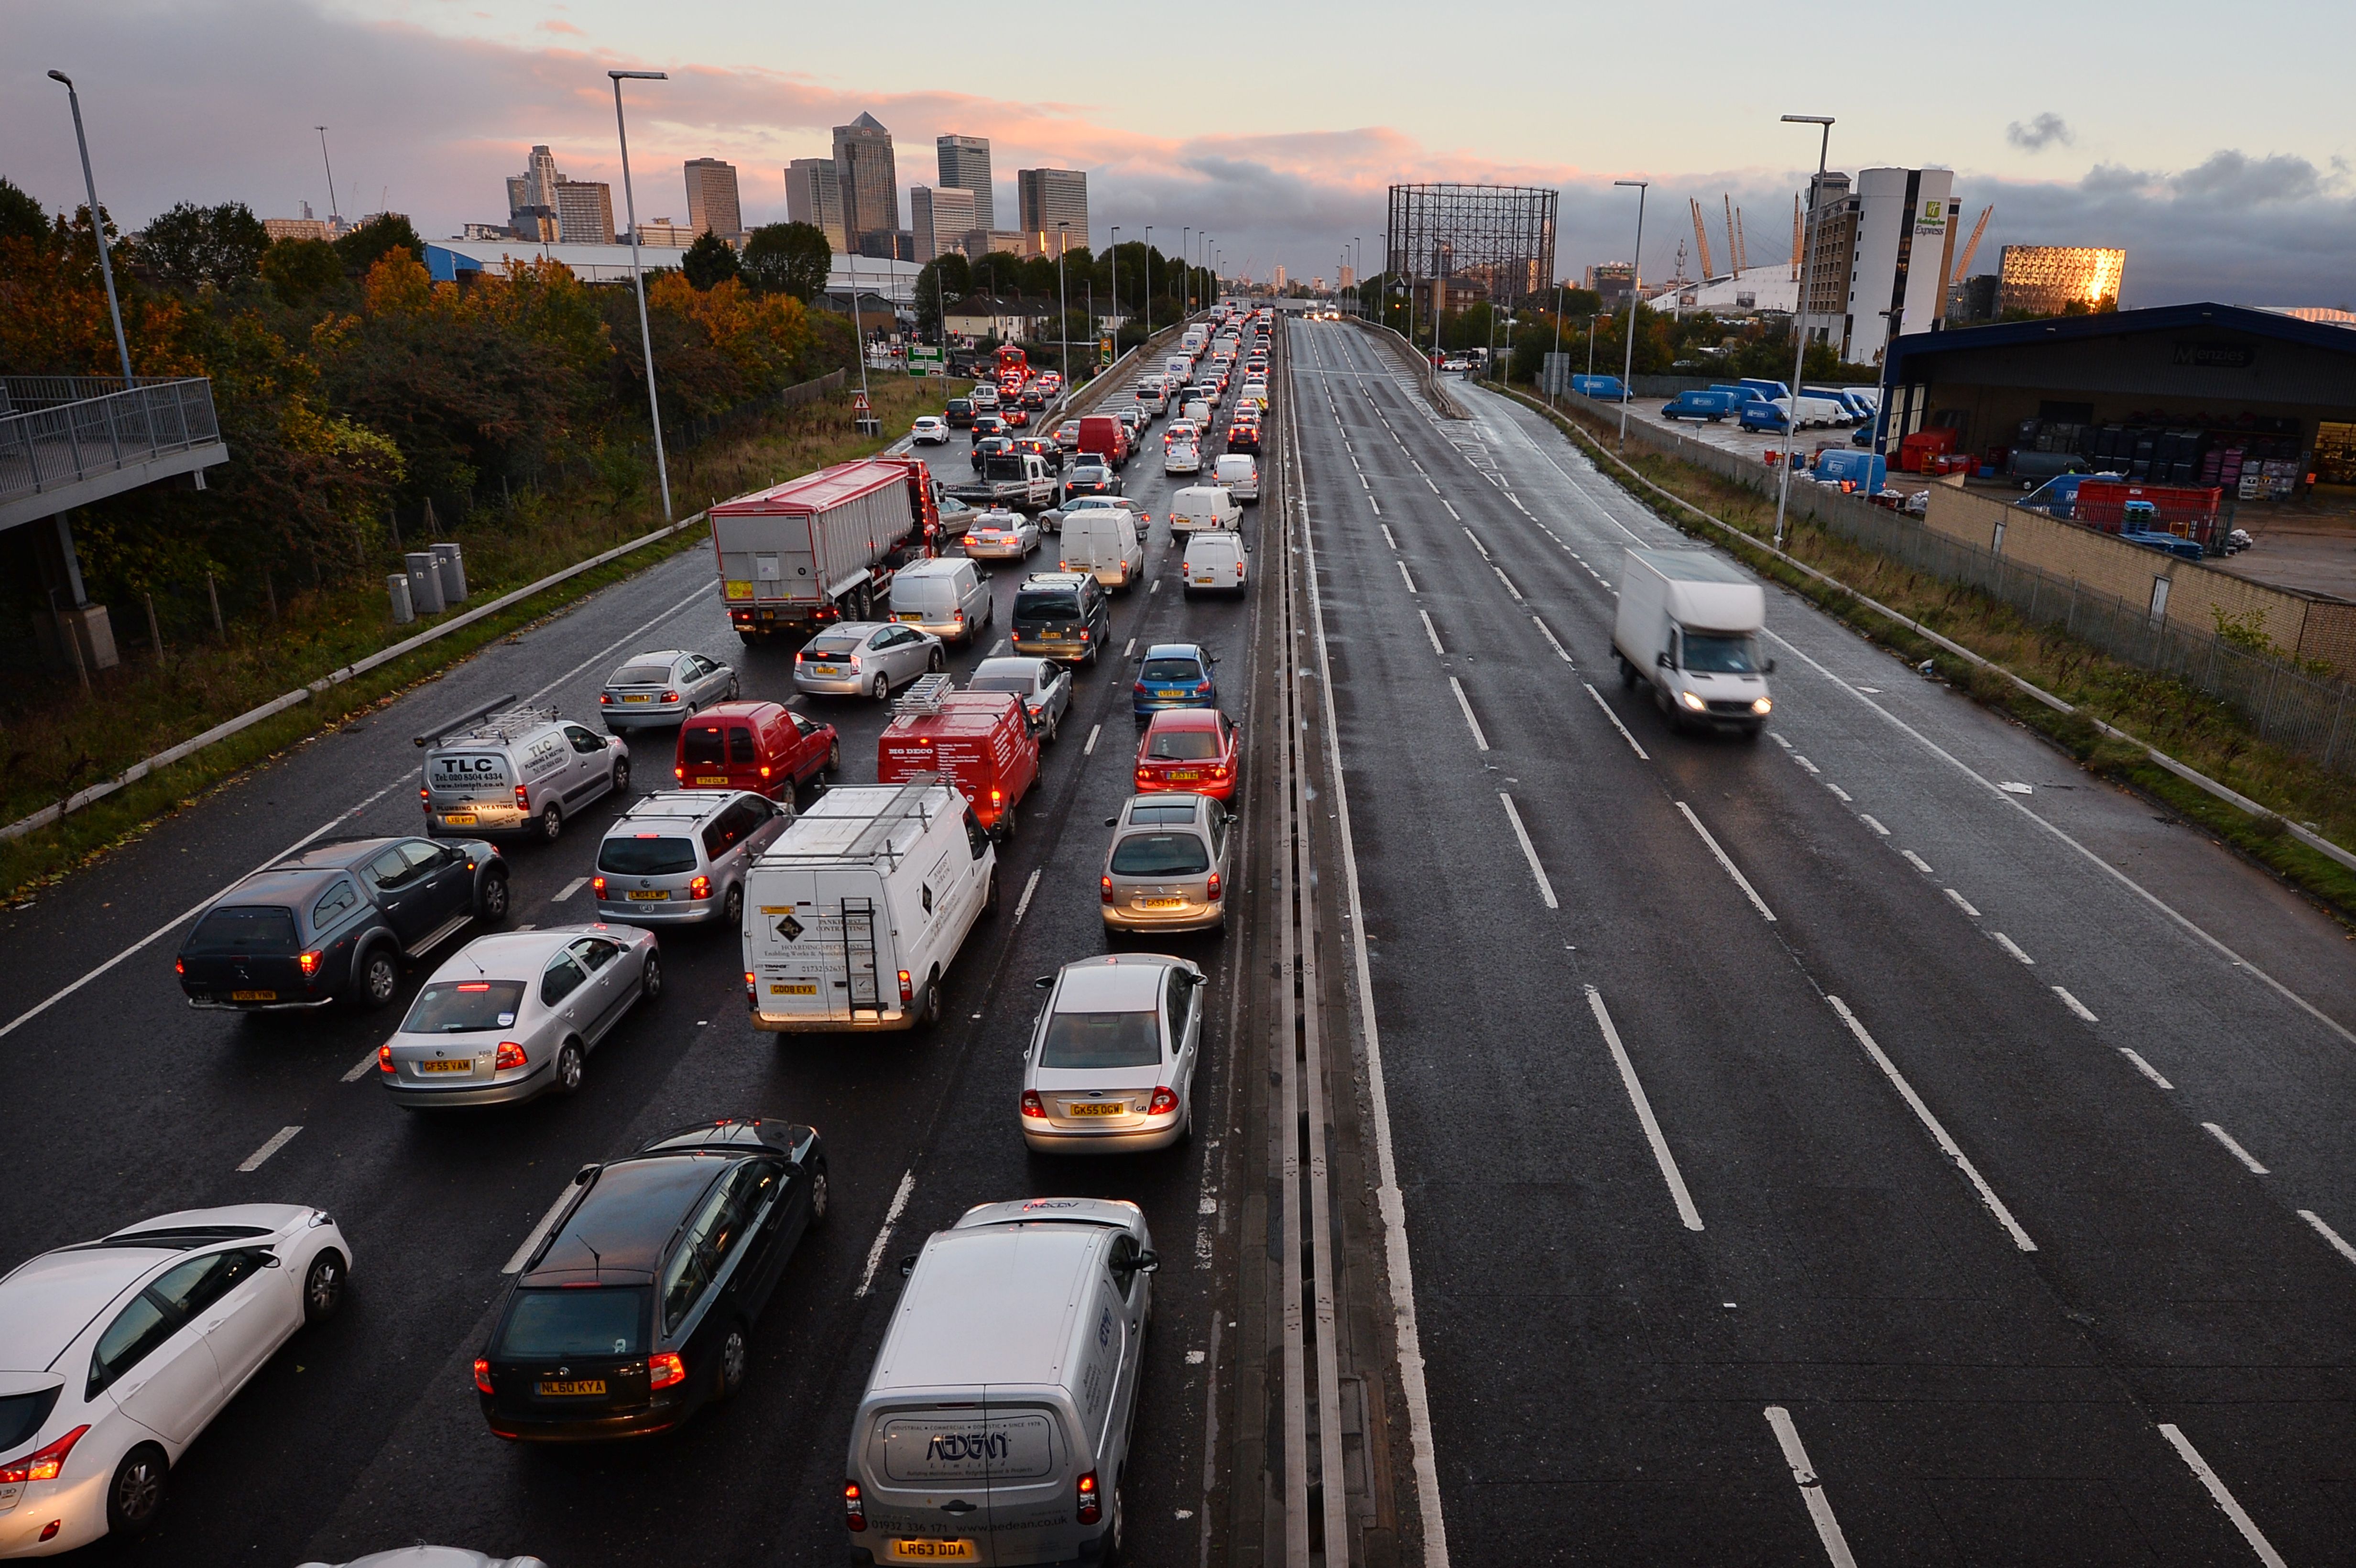 Ministers have been urged to reconsider whether to impose limits on what new drivers can do on the road